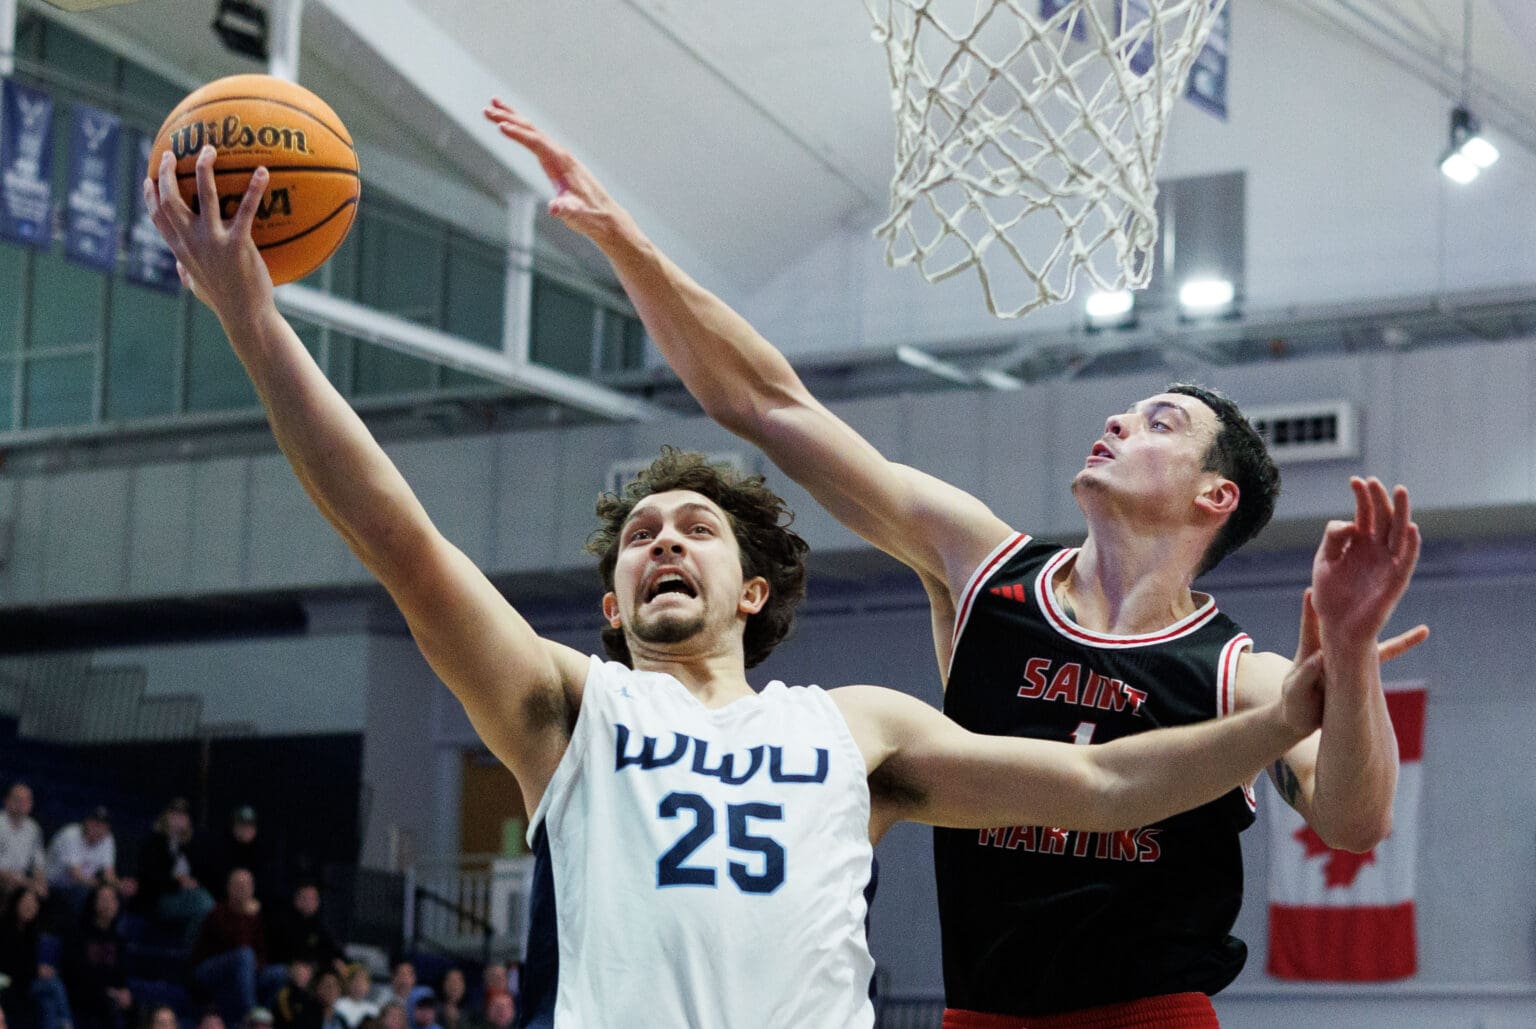 Western Washington University's Louis Grante-Halliday leaps for a layup as a defender tries to reach over him to block the shot.